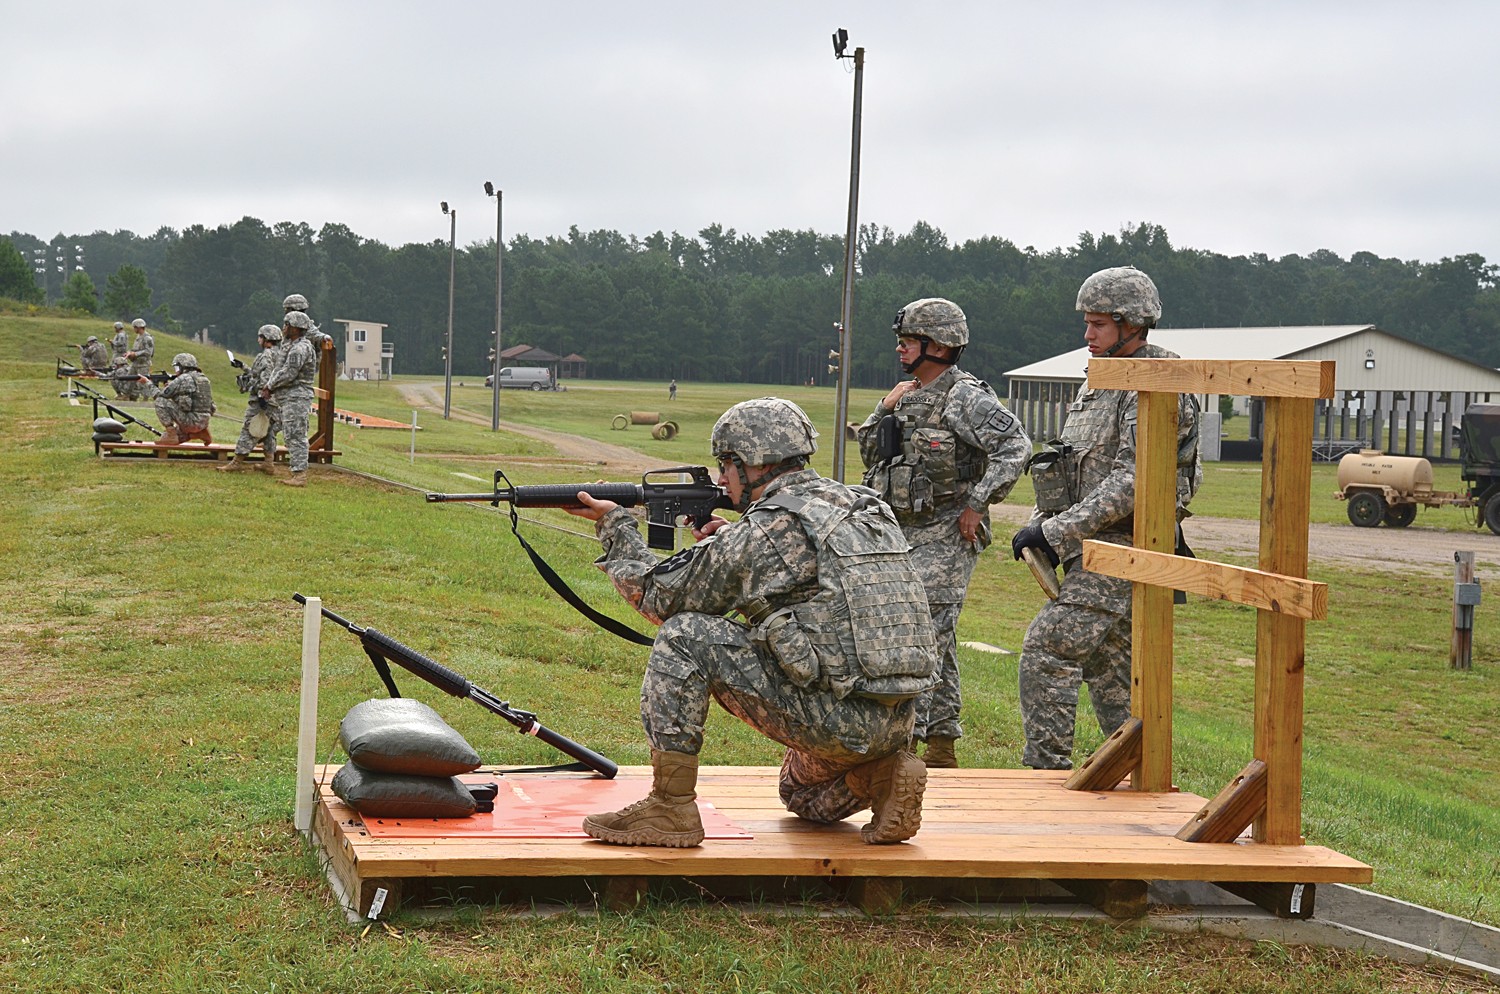 New range opens, offers better training opportunities | Article | The  United States Army